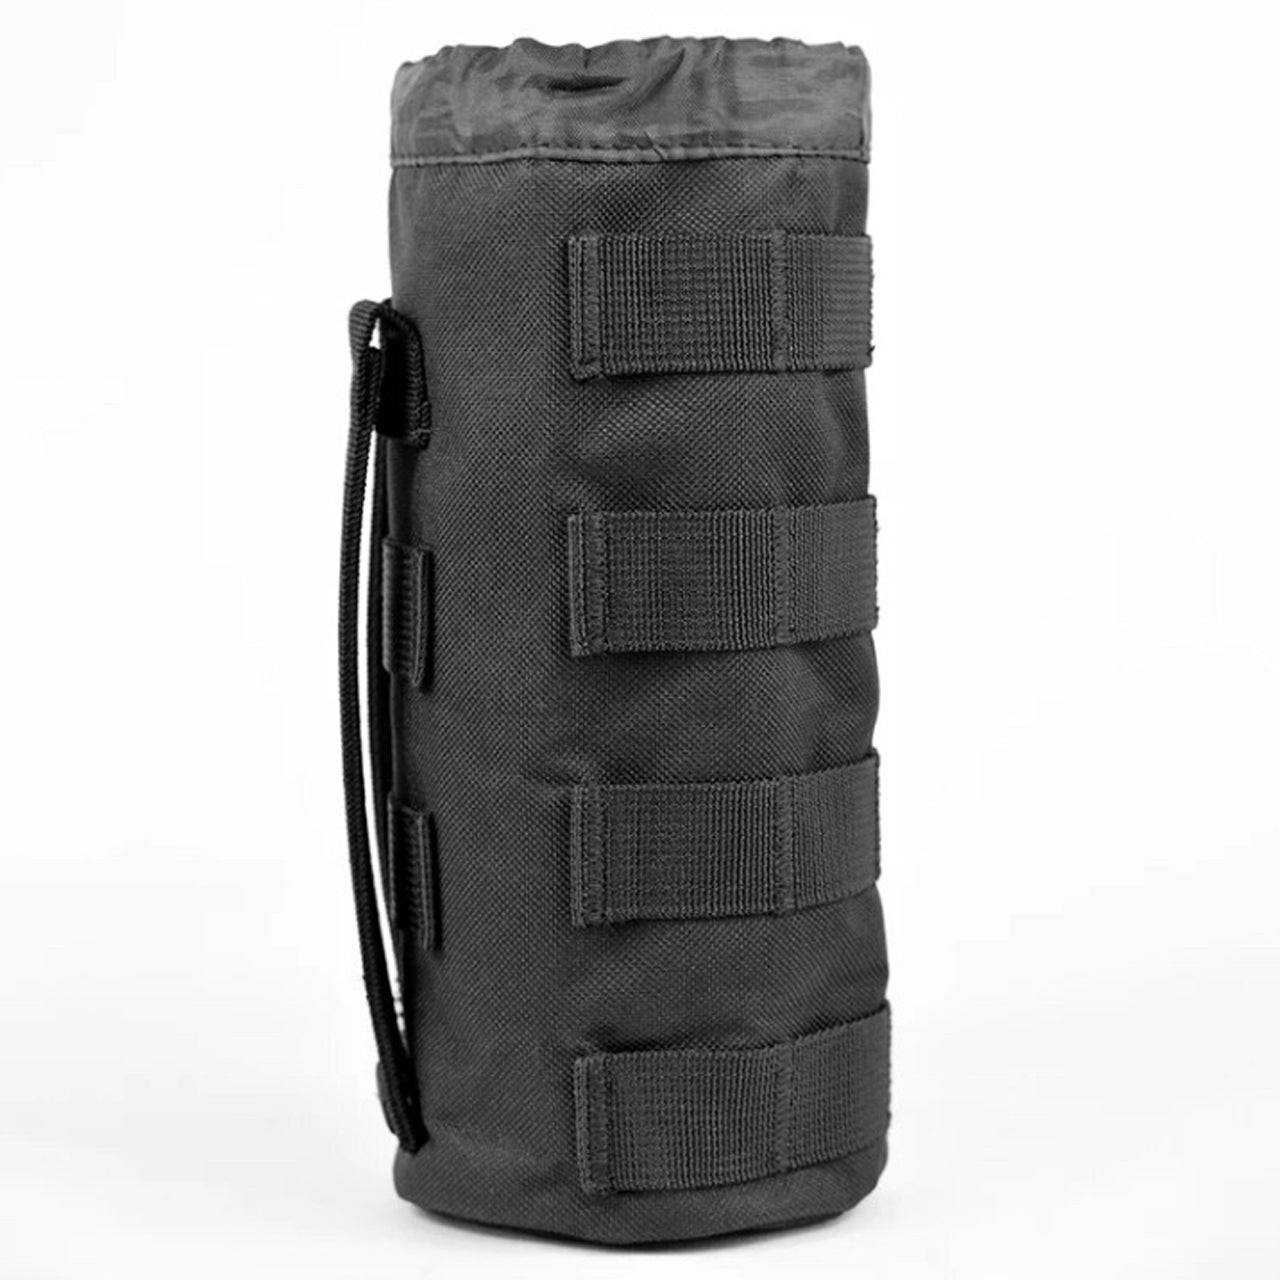 Molle Compatible, Tactical Molle Board, Molle System, Morale Tactical